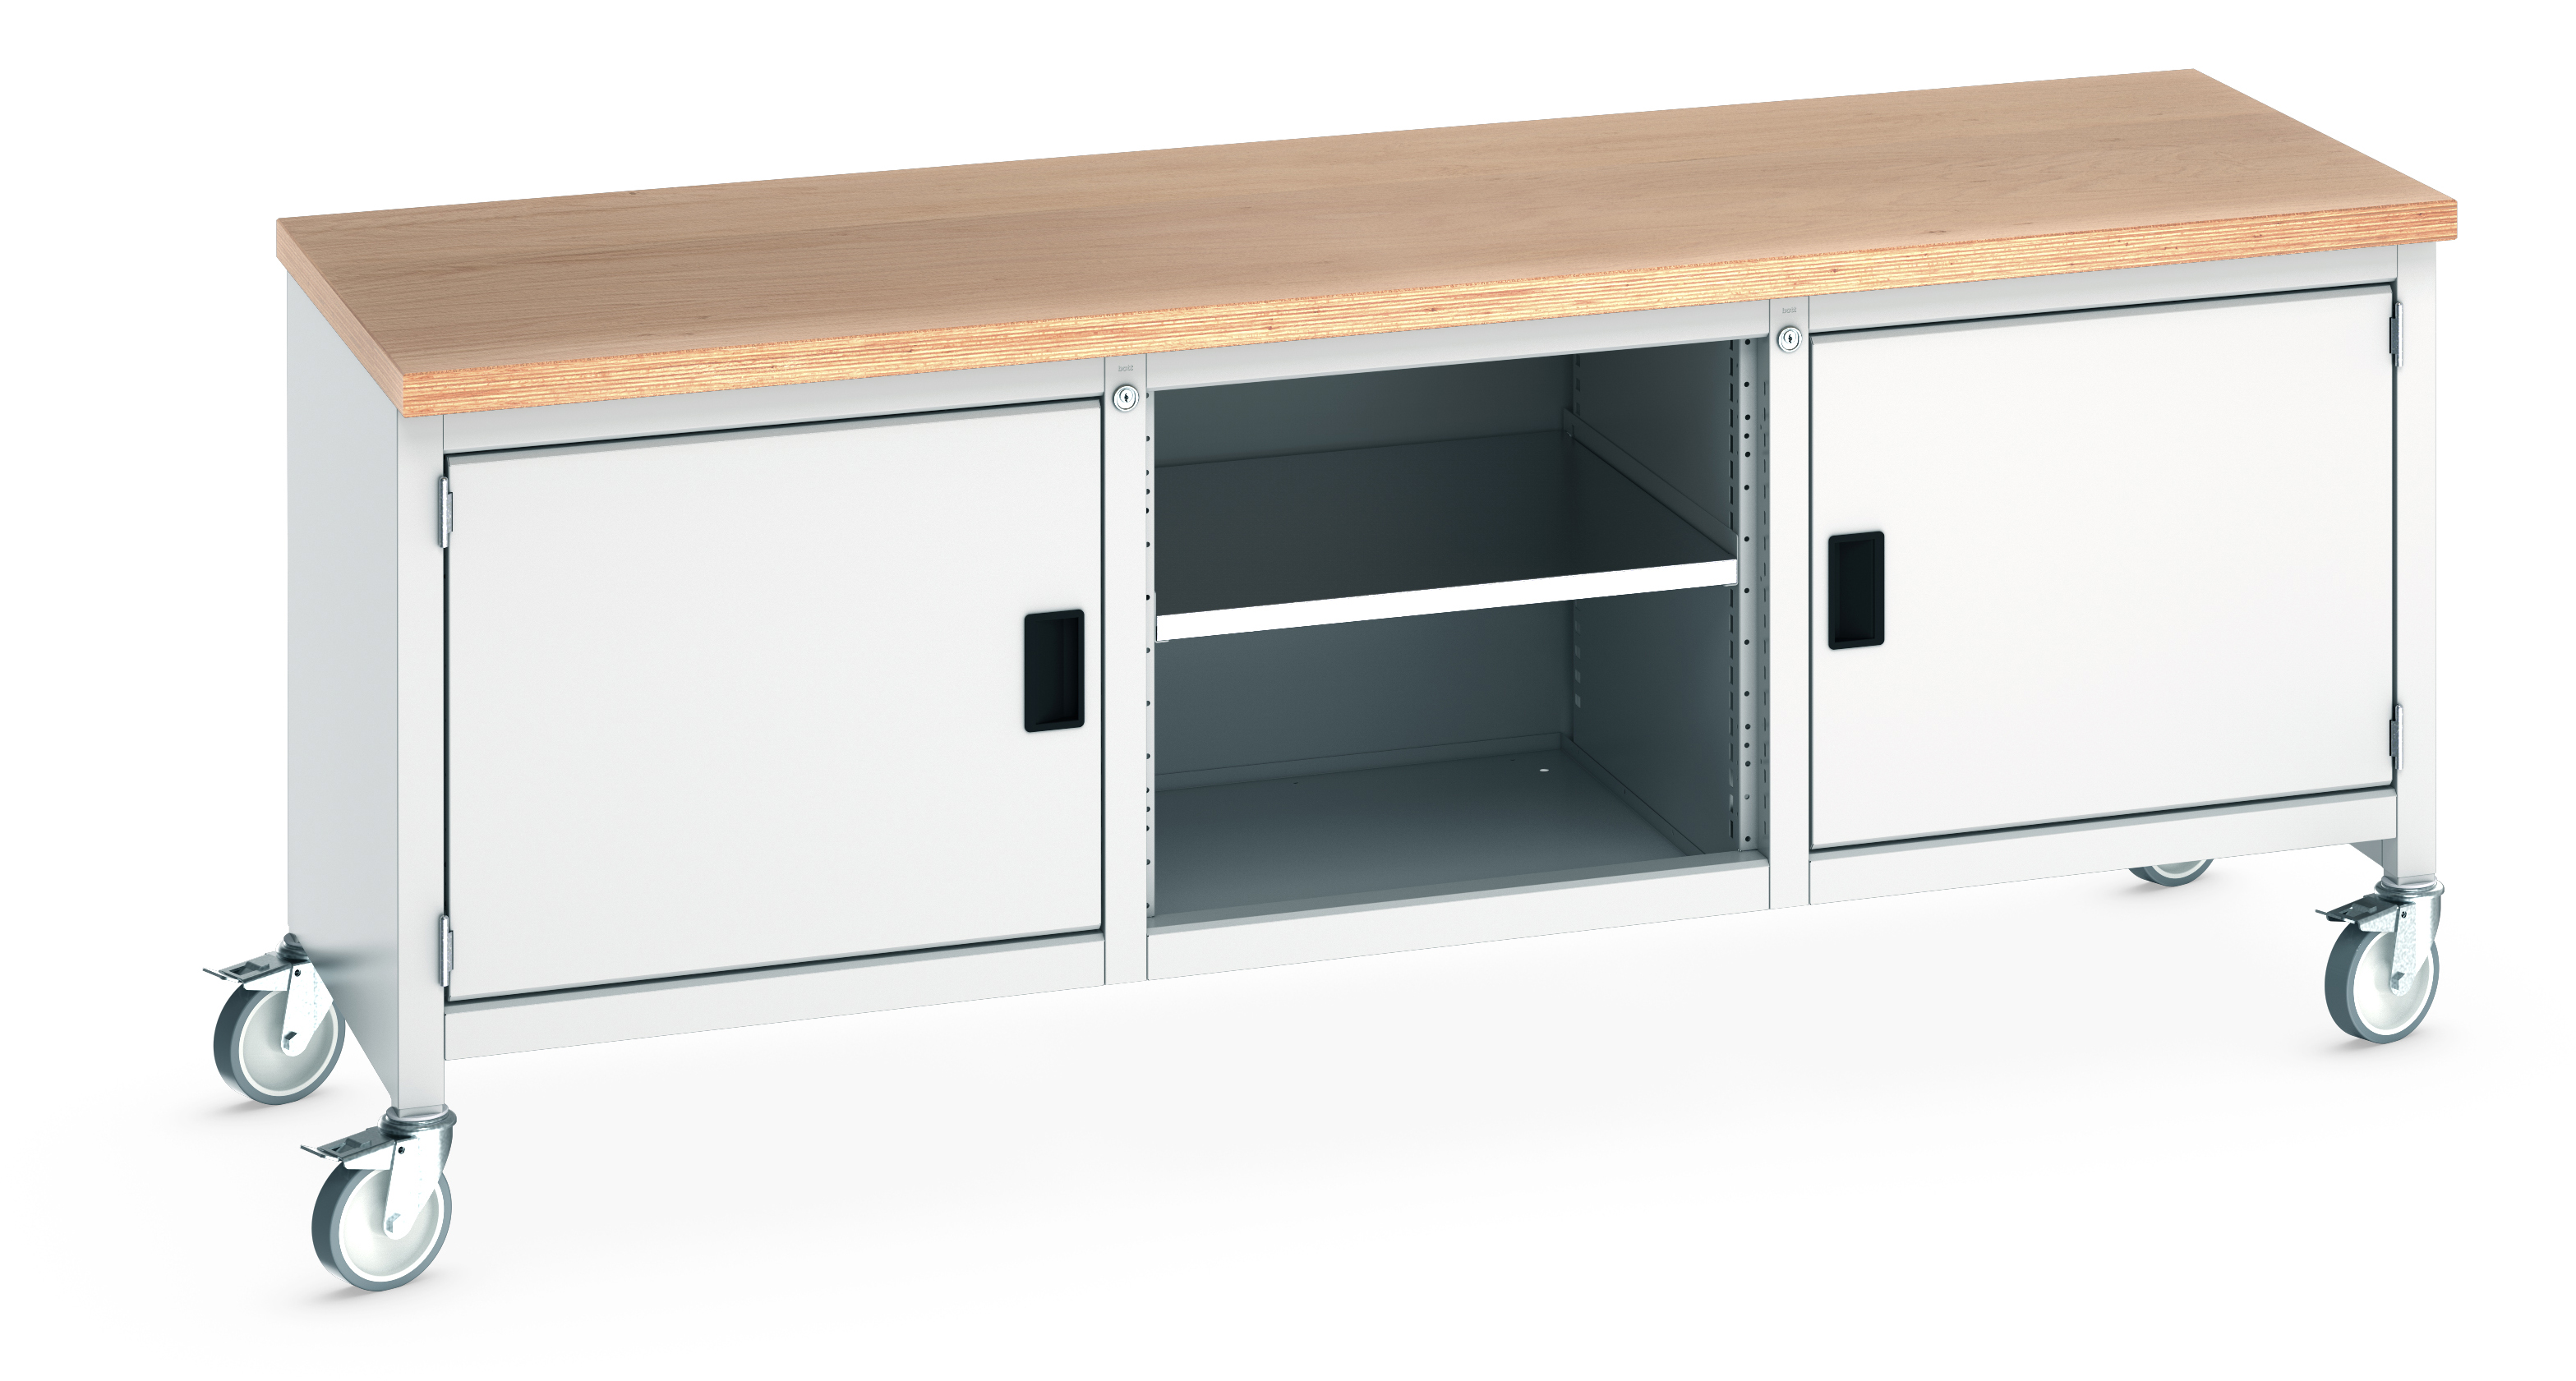 Bott Cubio Mobile Storage Bench With Full Cupboard / Open Cupboard /Full Cupboard - 41002118.16V